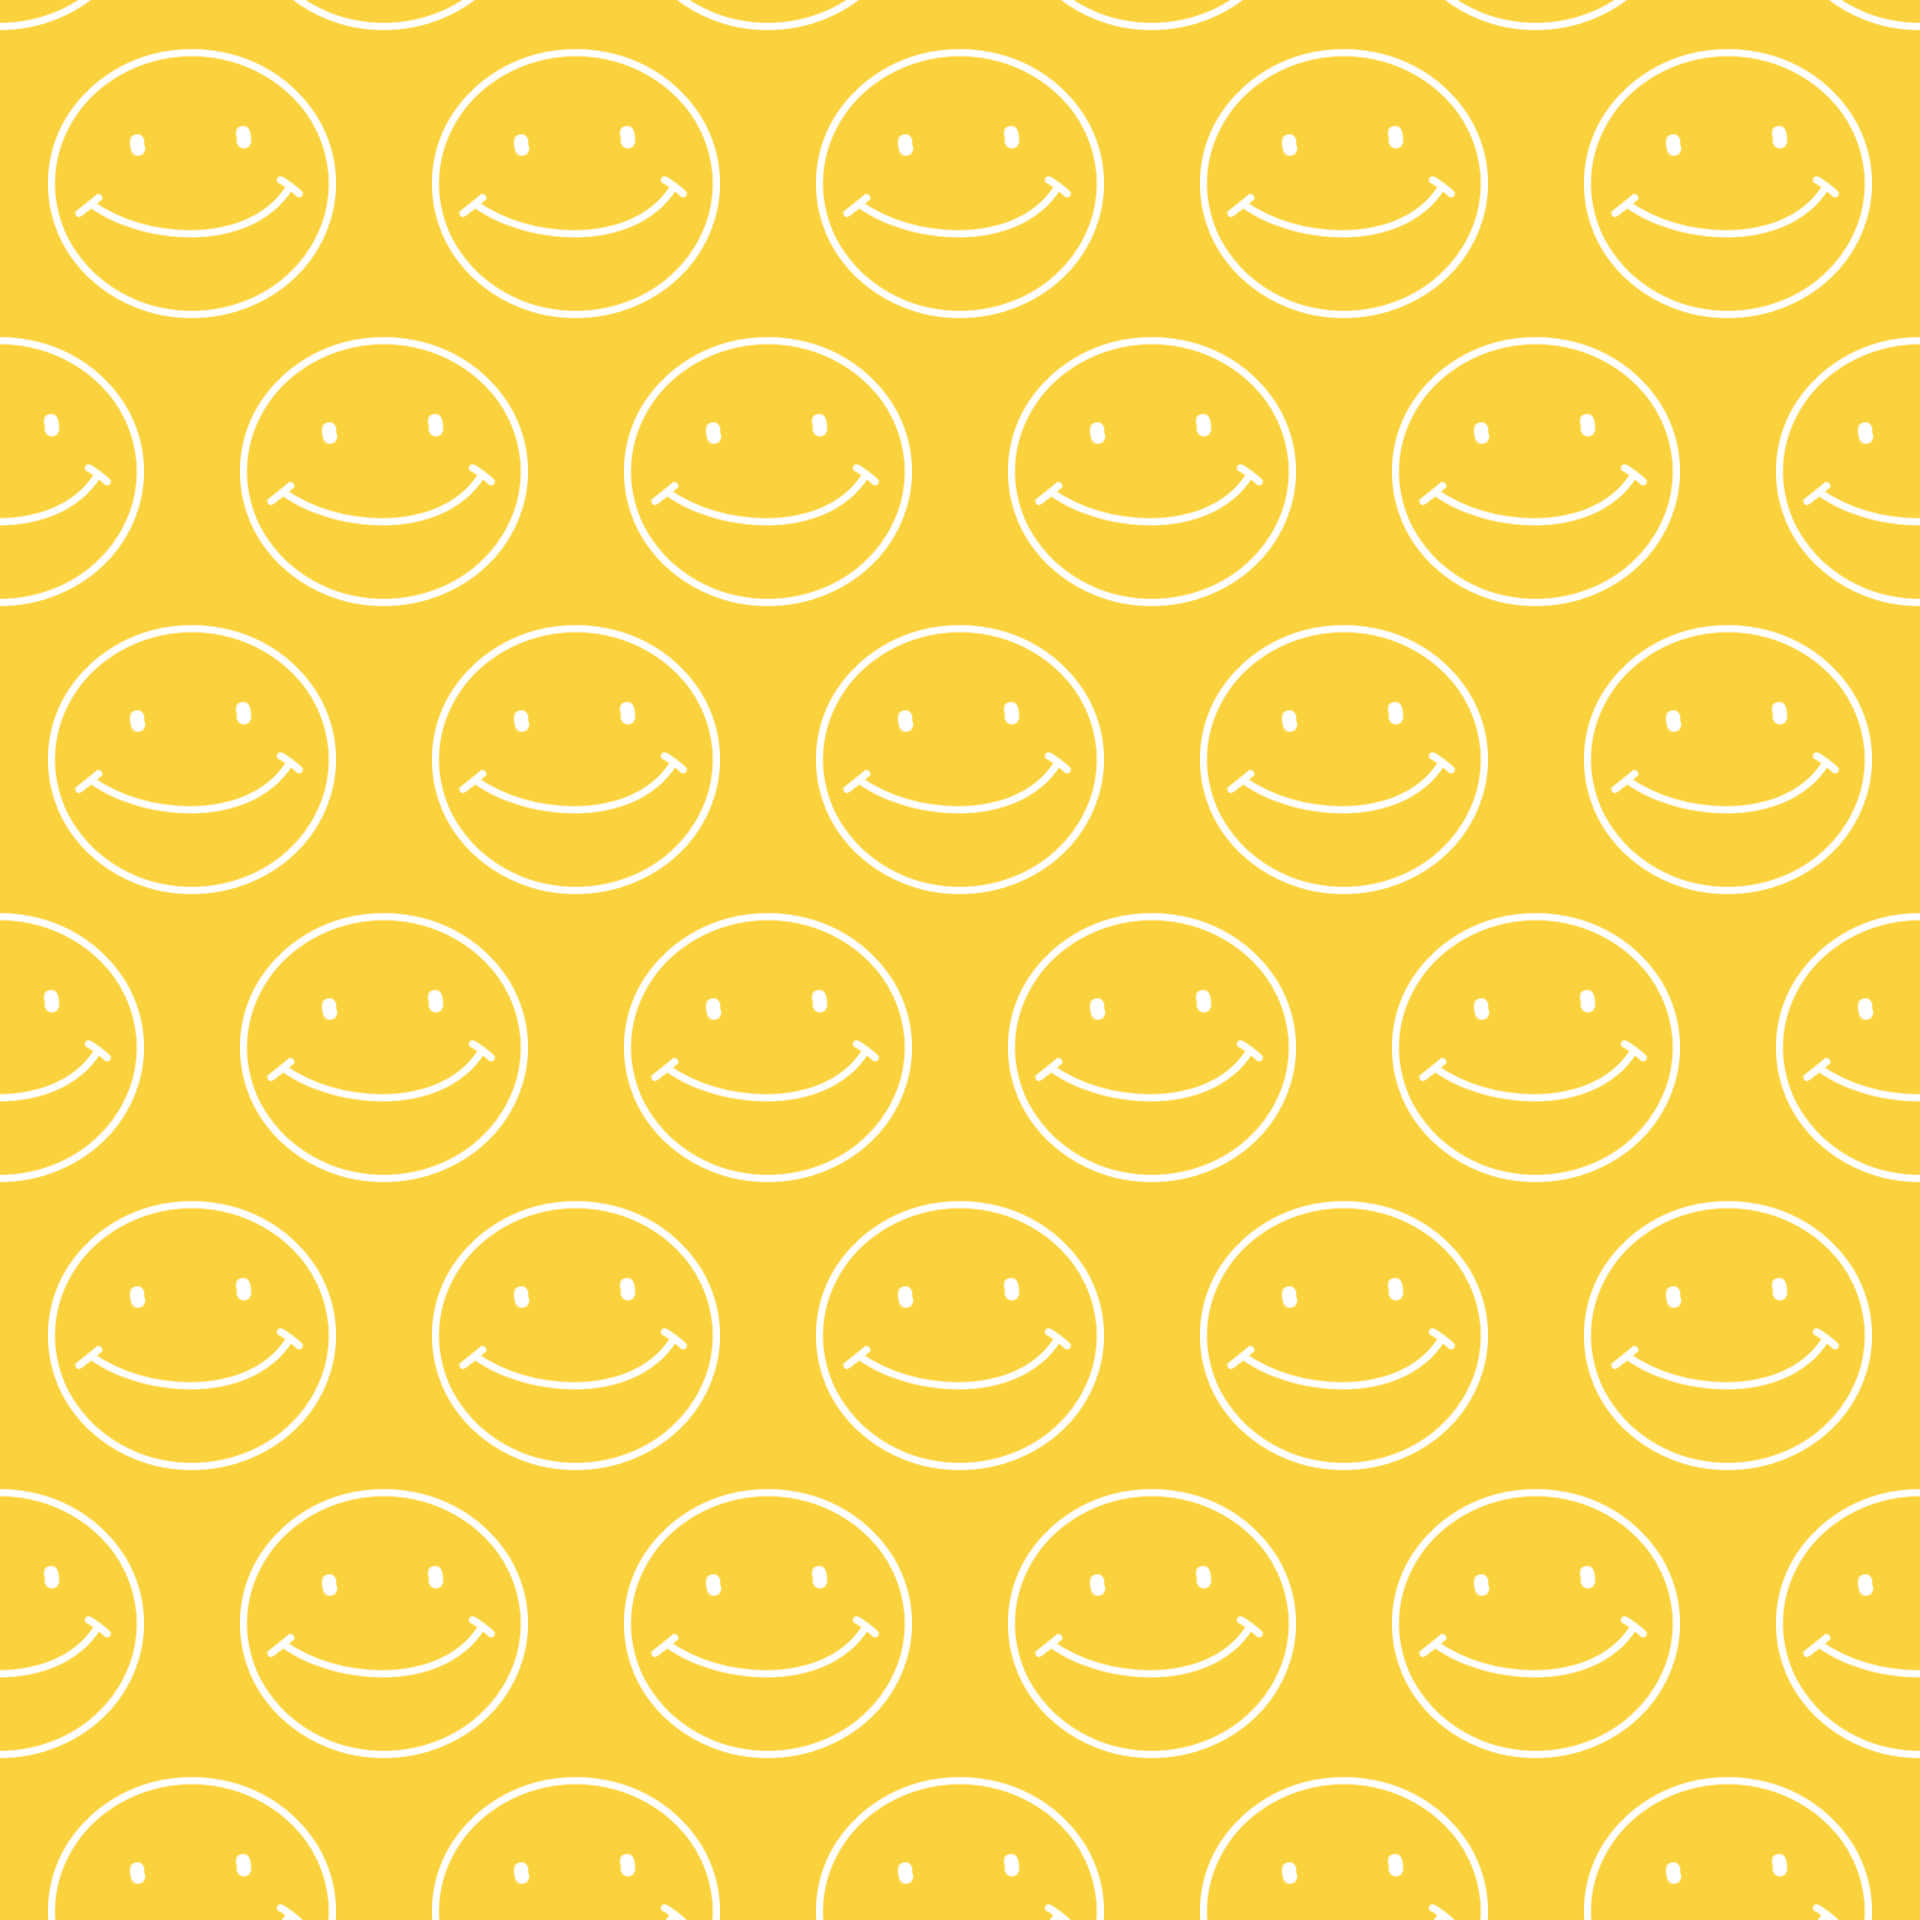 Captivating Array Of Colorful Smileys